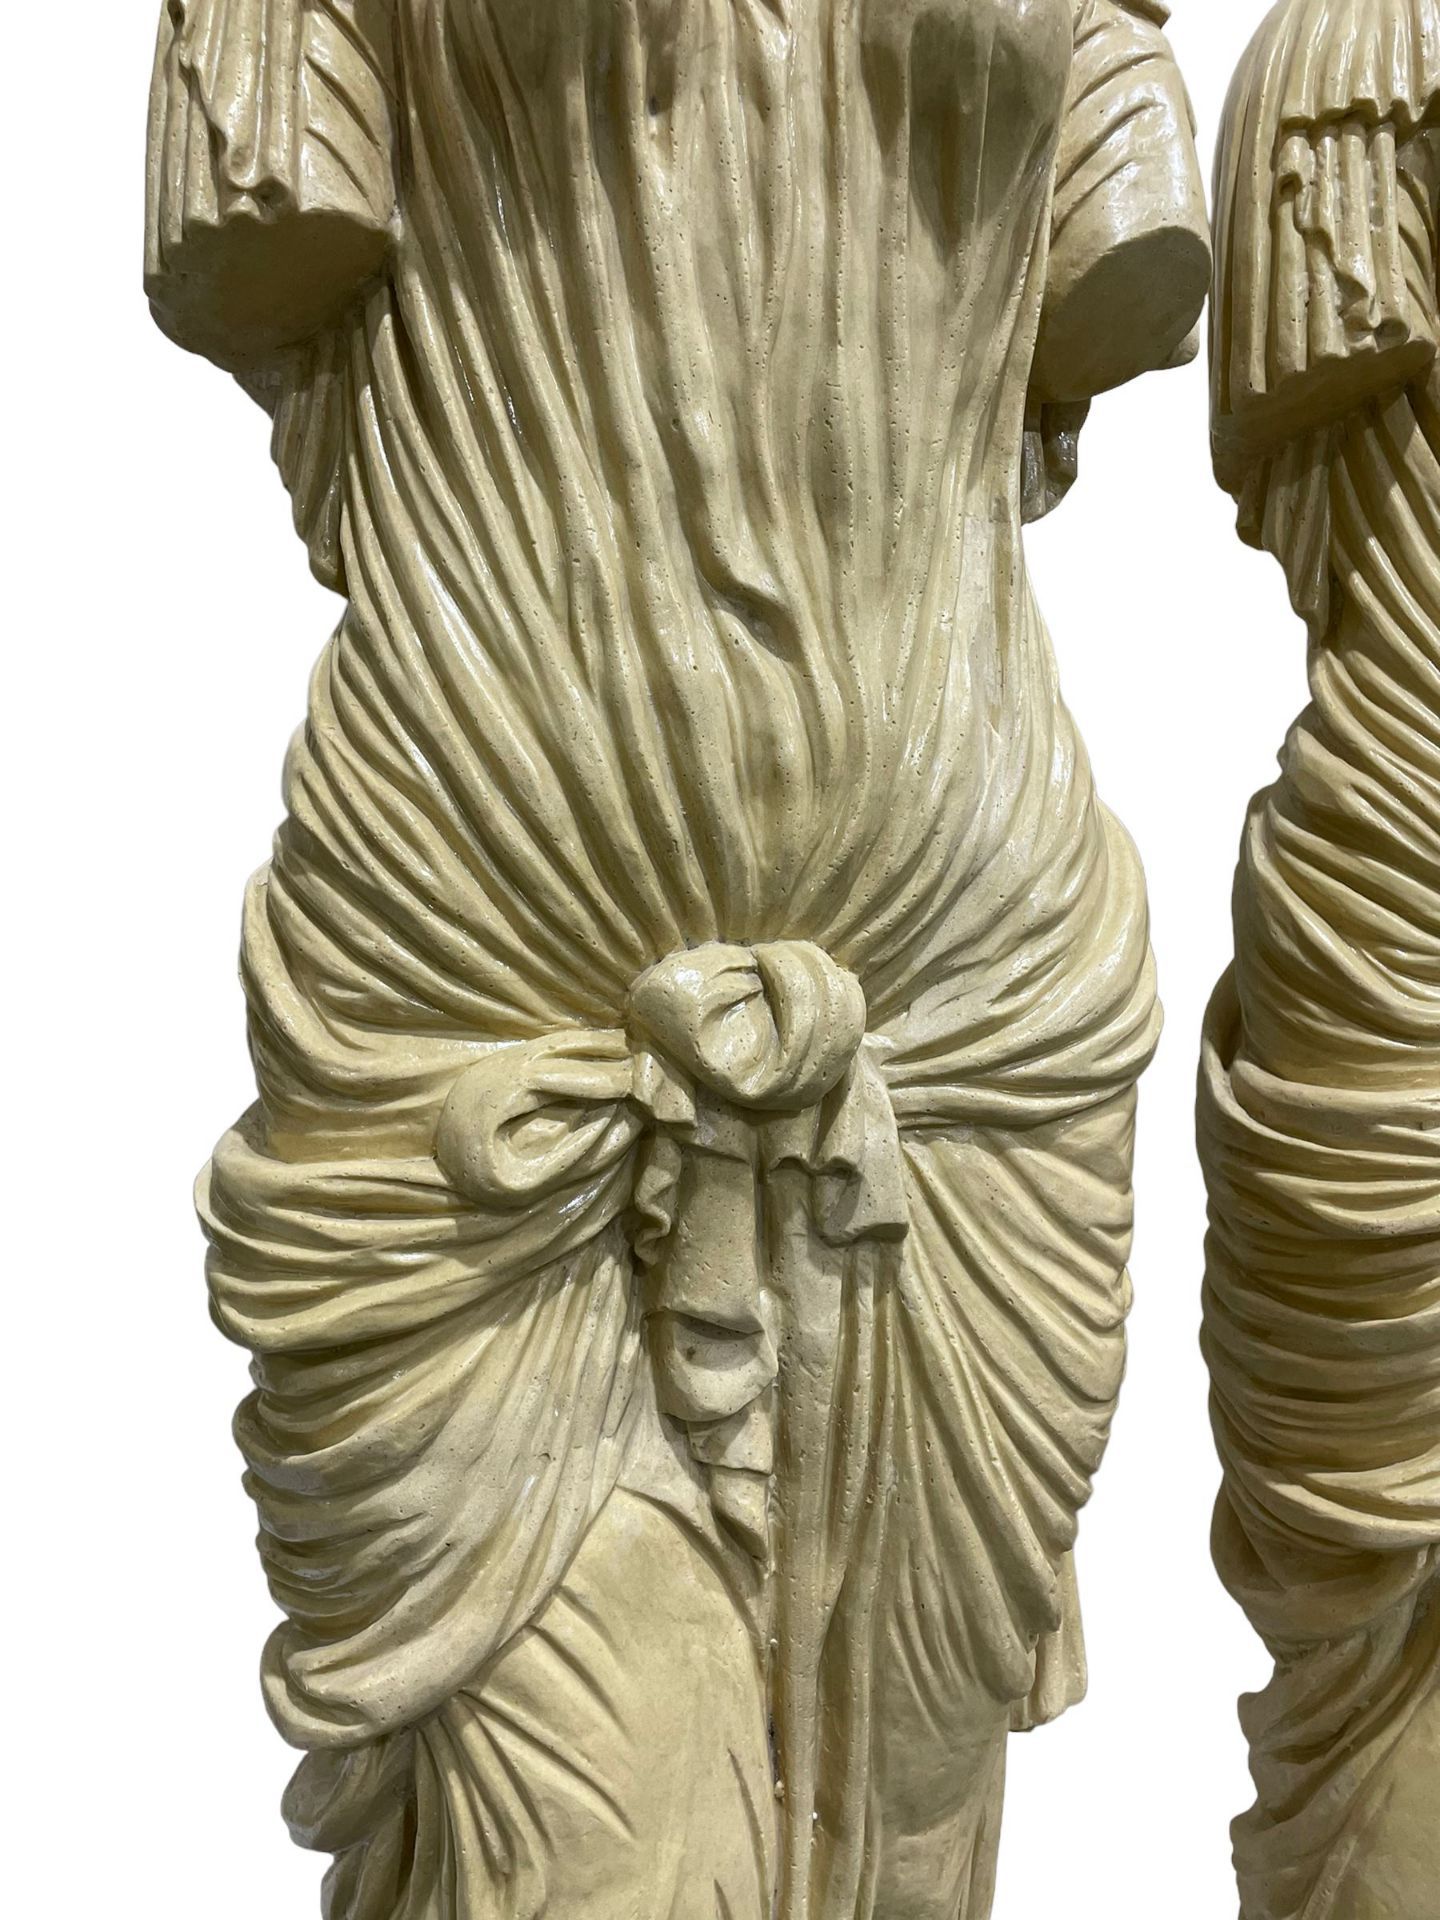 A Pair Of Greek Style Caryatid Columns As an architectural support for an entablature on the head of - Image 2 of 3